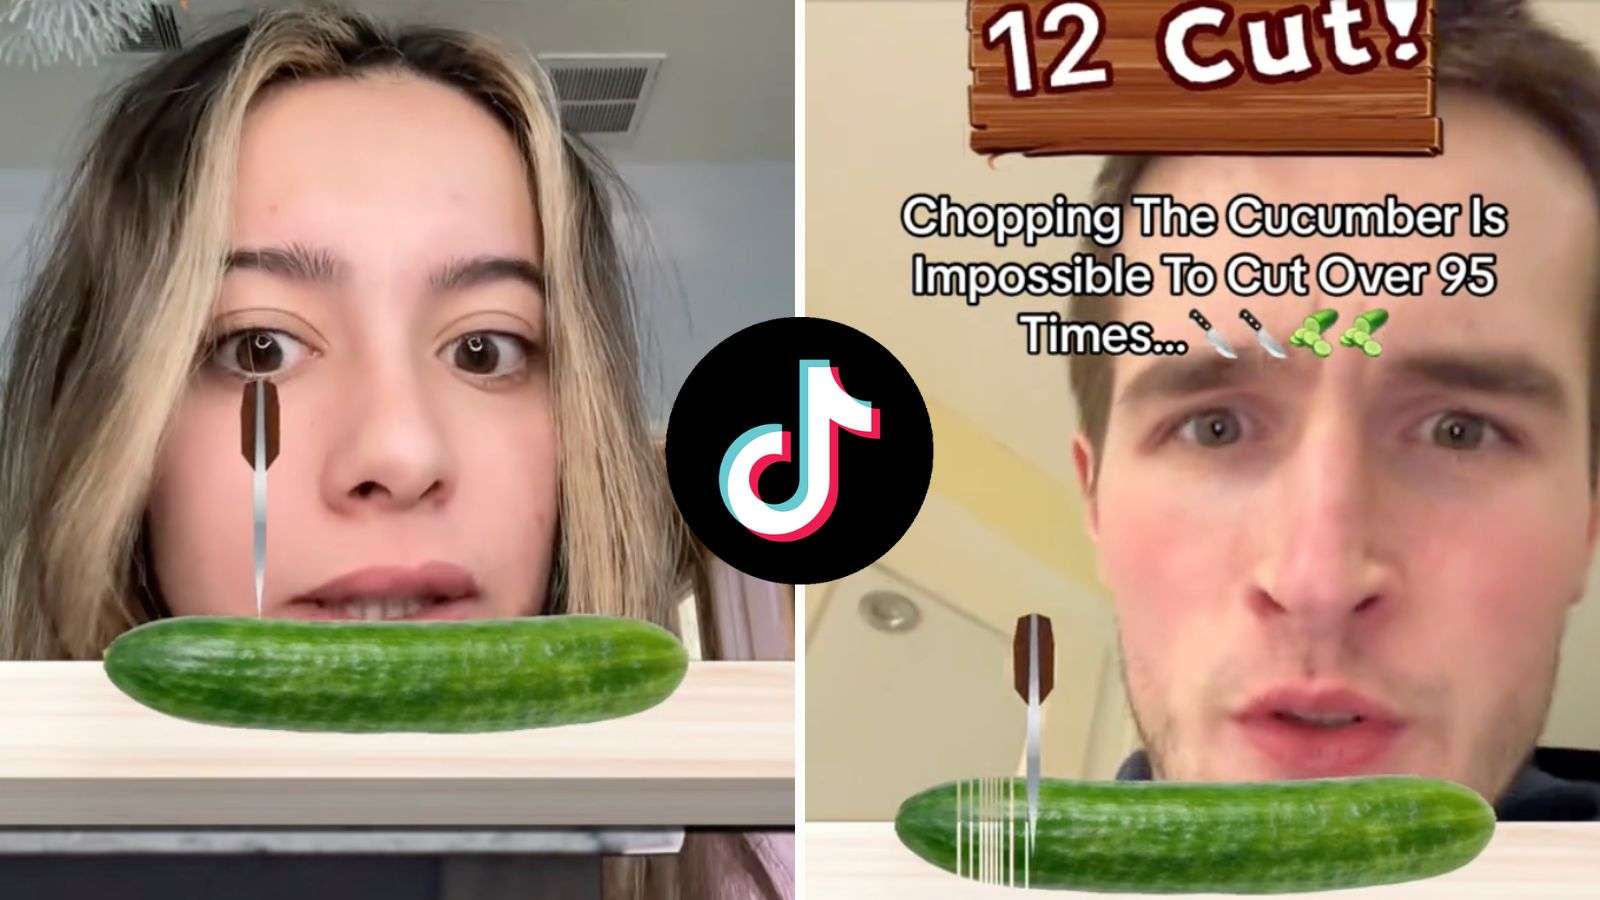 How to play the ‘cucumber cutting’ minigame on TikTok